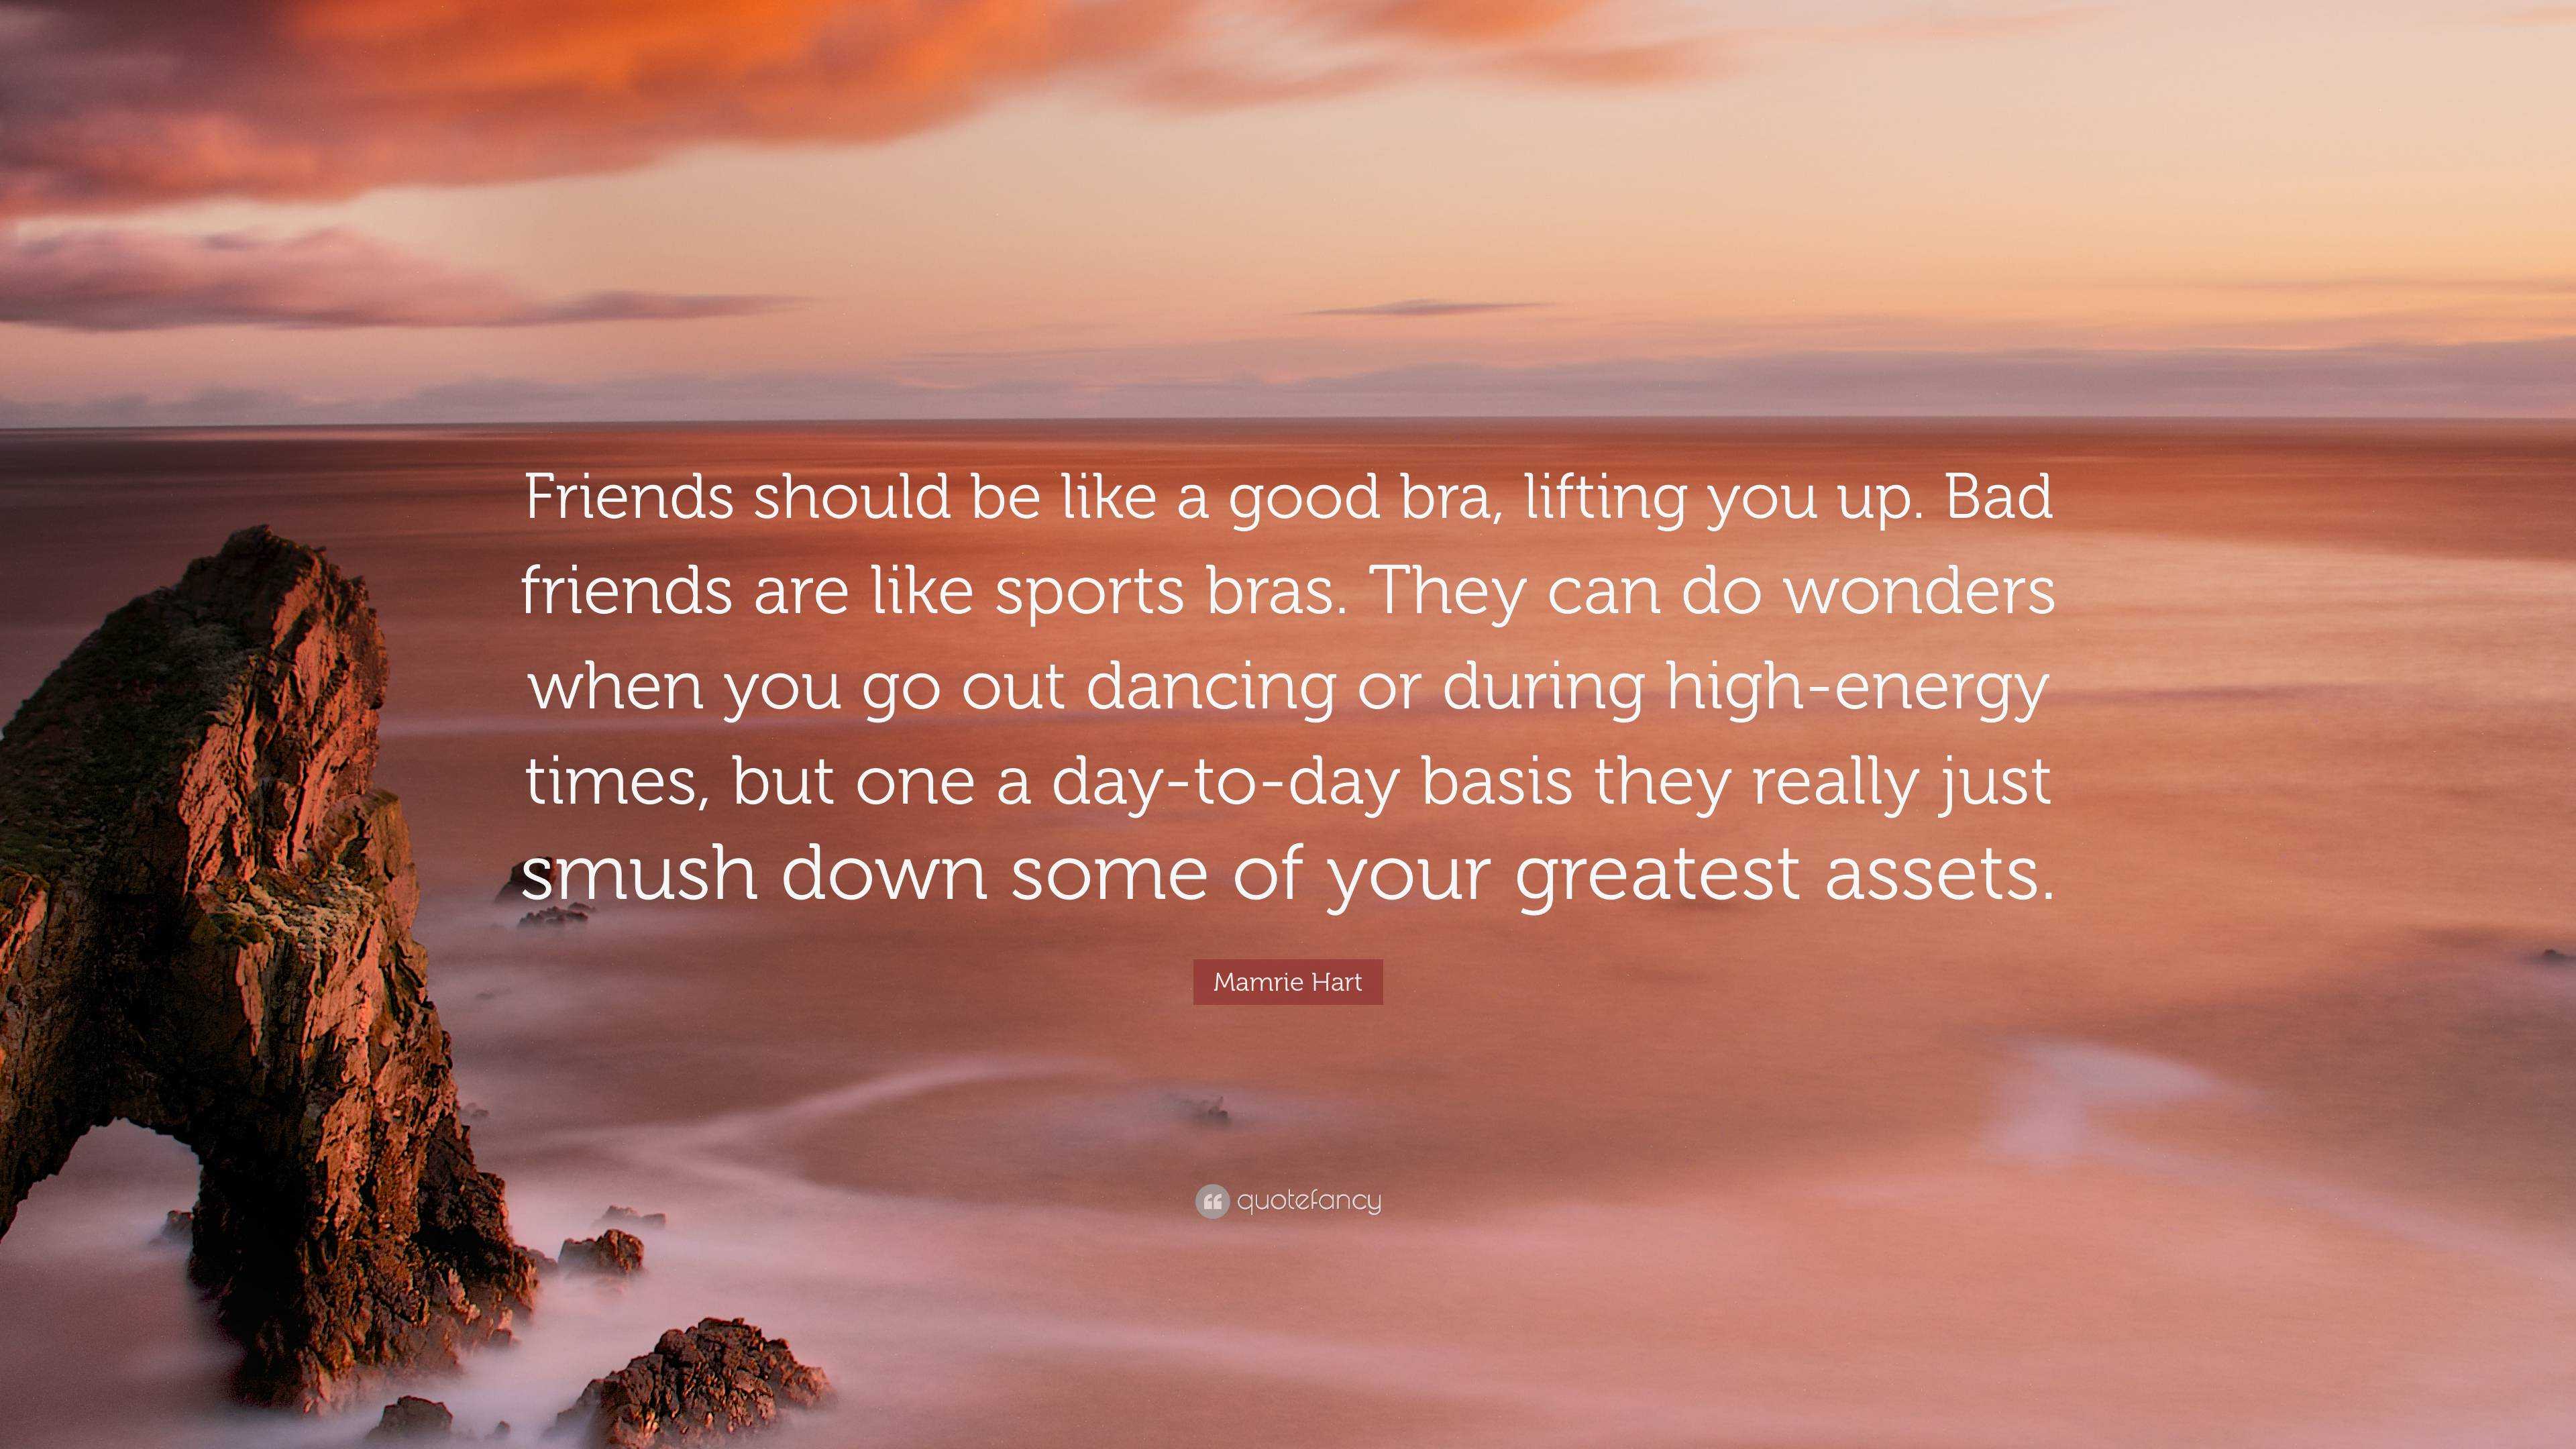 Mamrie Hart Quote: “Friends should be like a good bra, lifting you up. Bad  friends are like sports bras. They can do wonders when you go out”